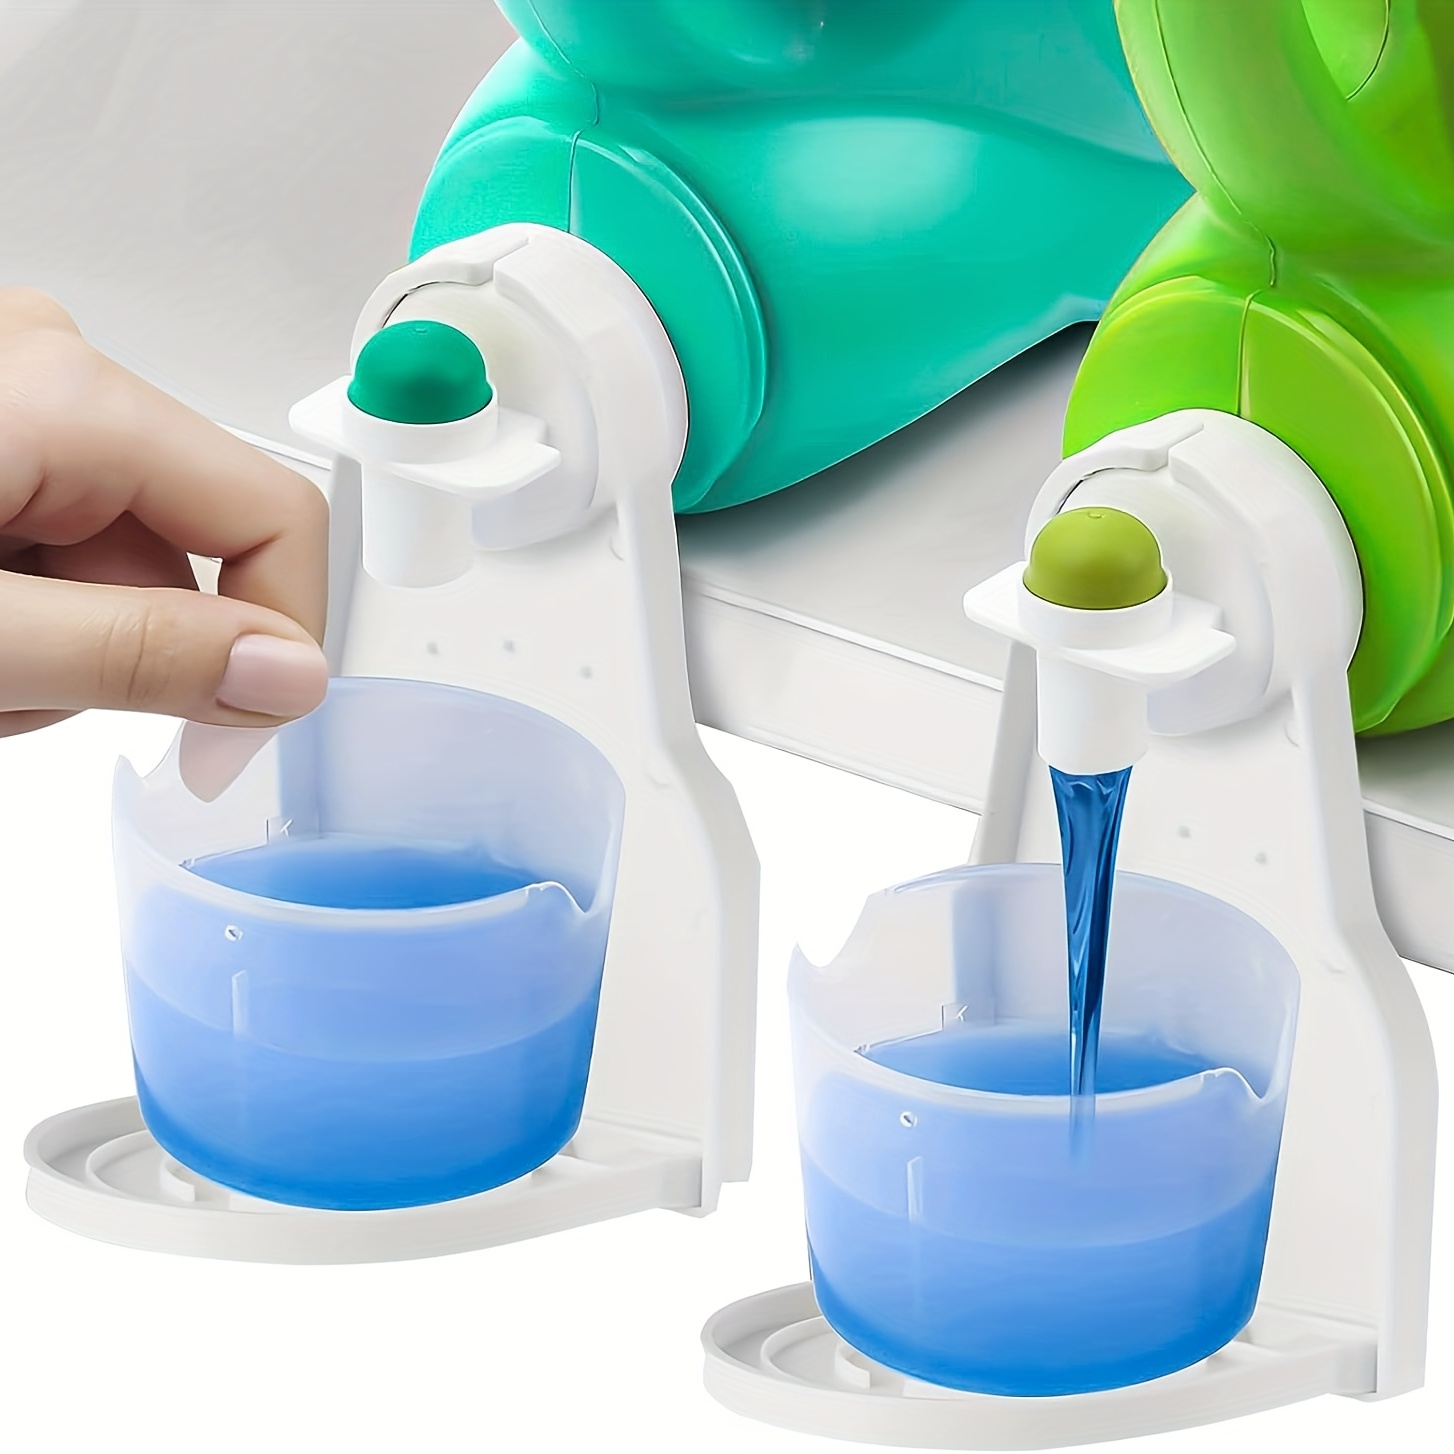 Laundry Detergent Cup Holder, Drip Tray Catcher for Laundry Fabric  Softener, No more mess and drips